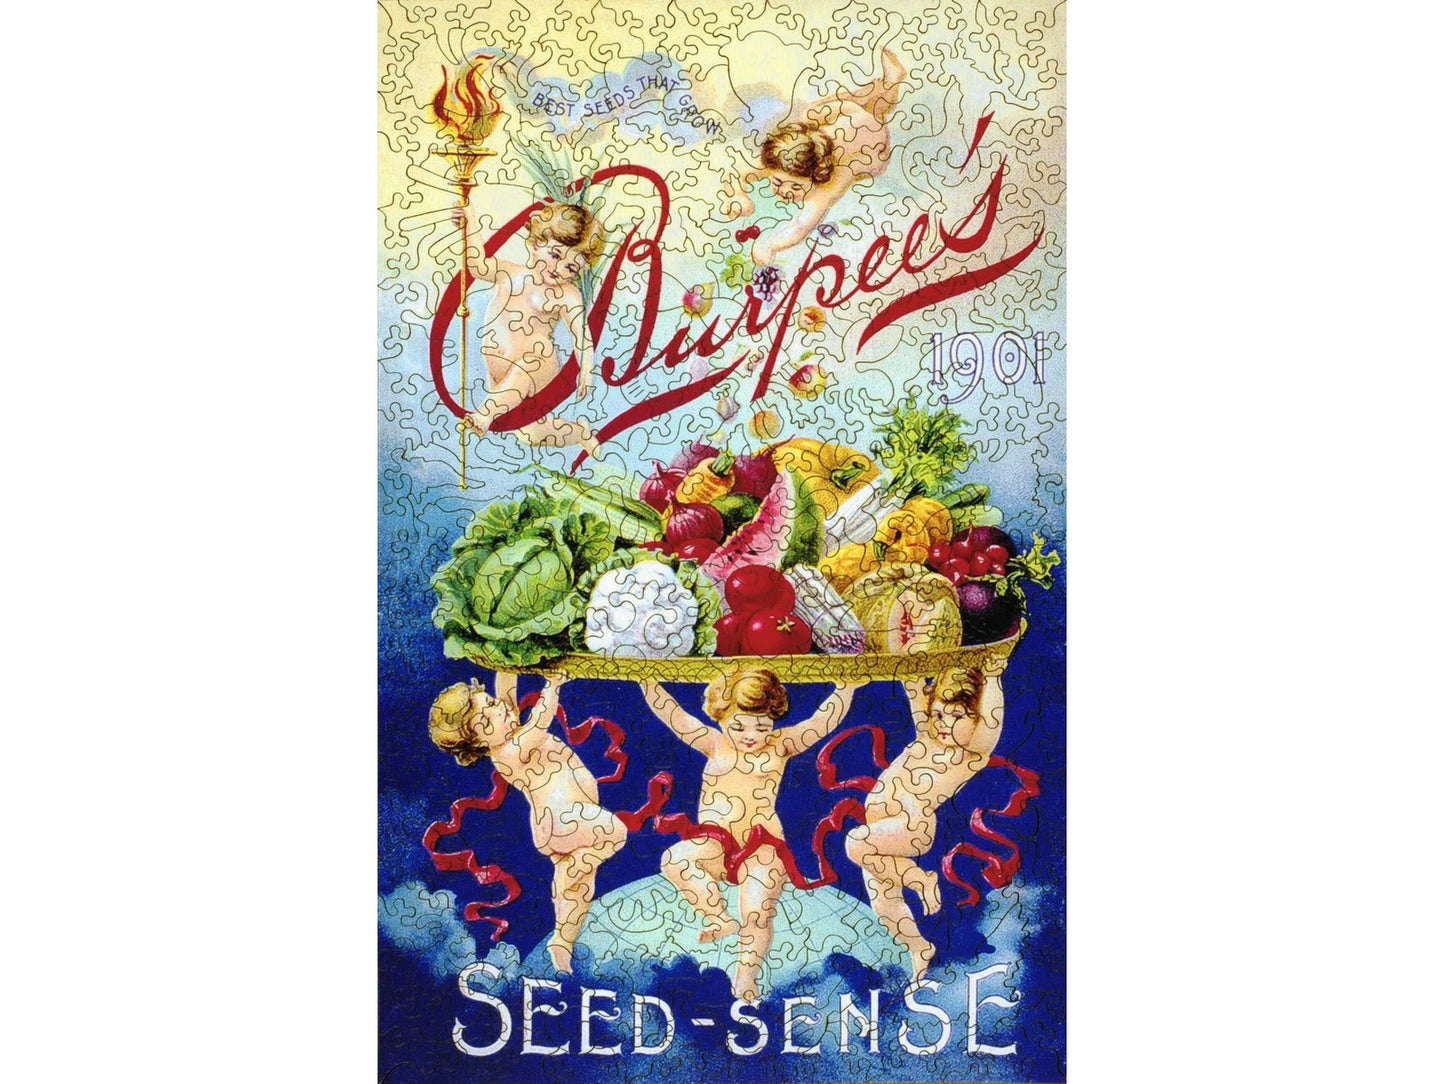 The front of the puzzle, Burpee's Seed Packet, showing three cherubs holding a large tray full of vegetables and fruit. 